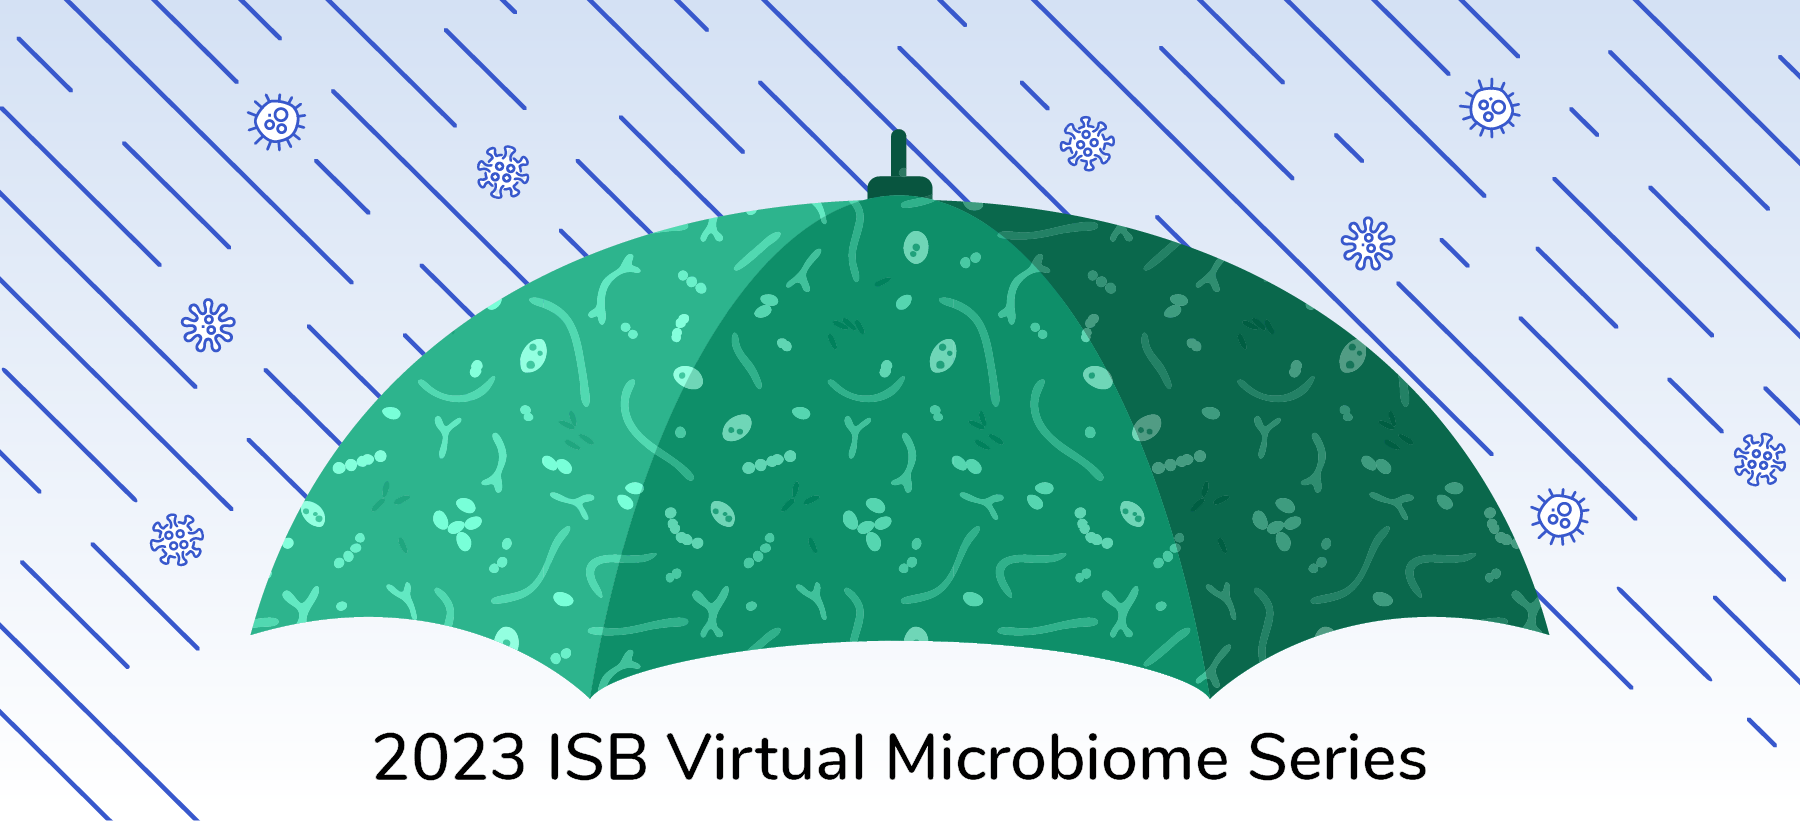 2023 Microbiome Course and Symposium by ISB